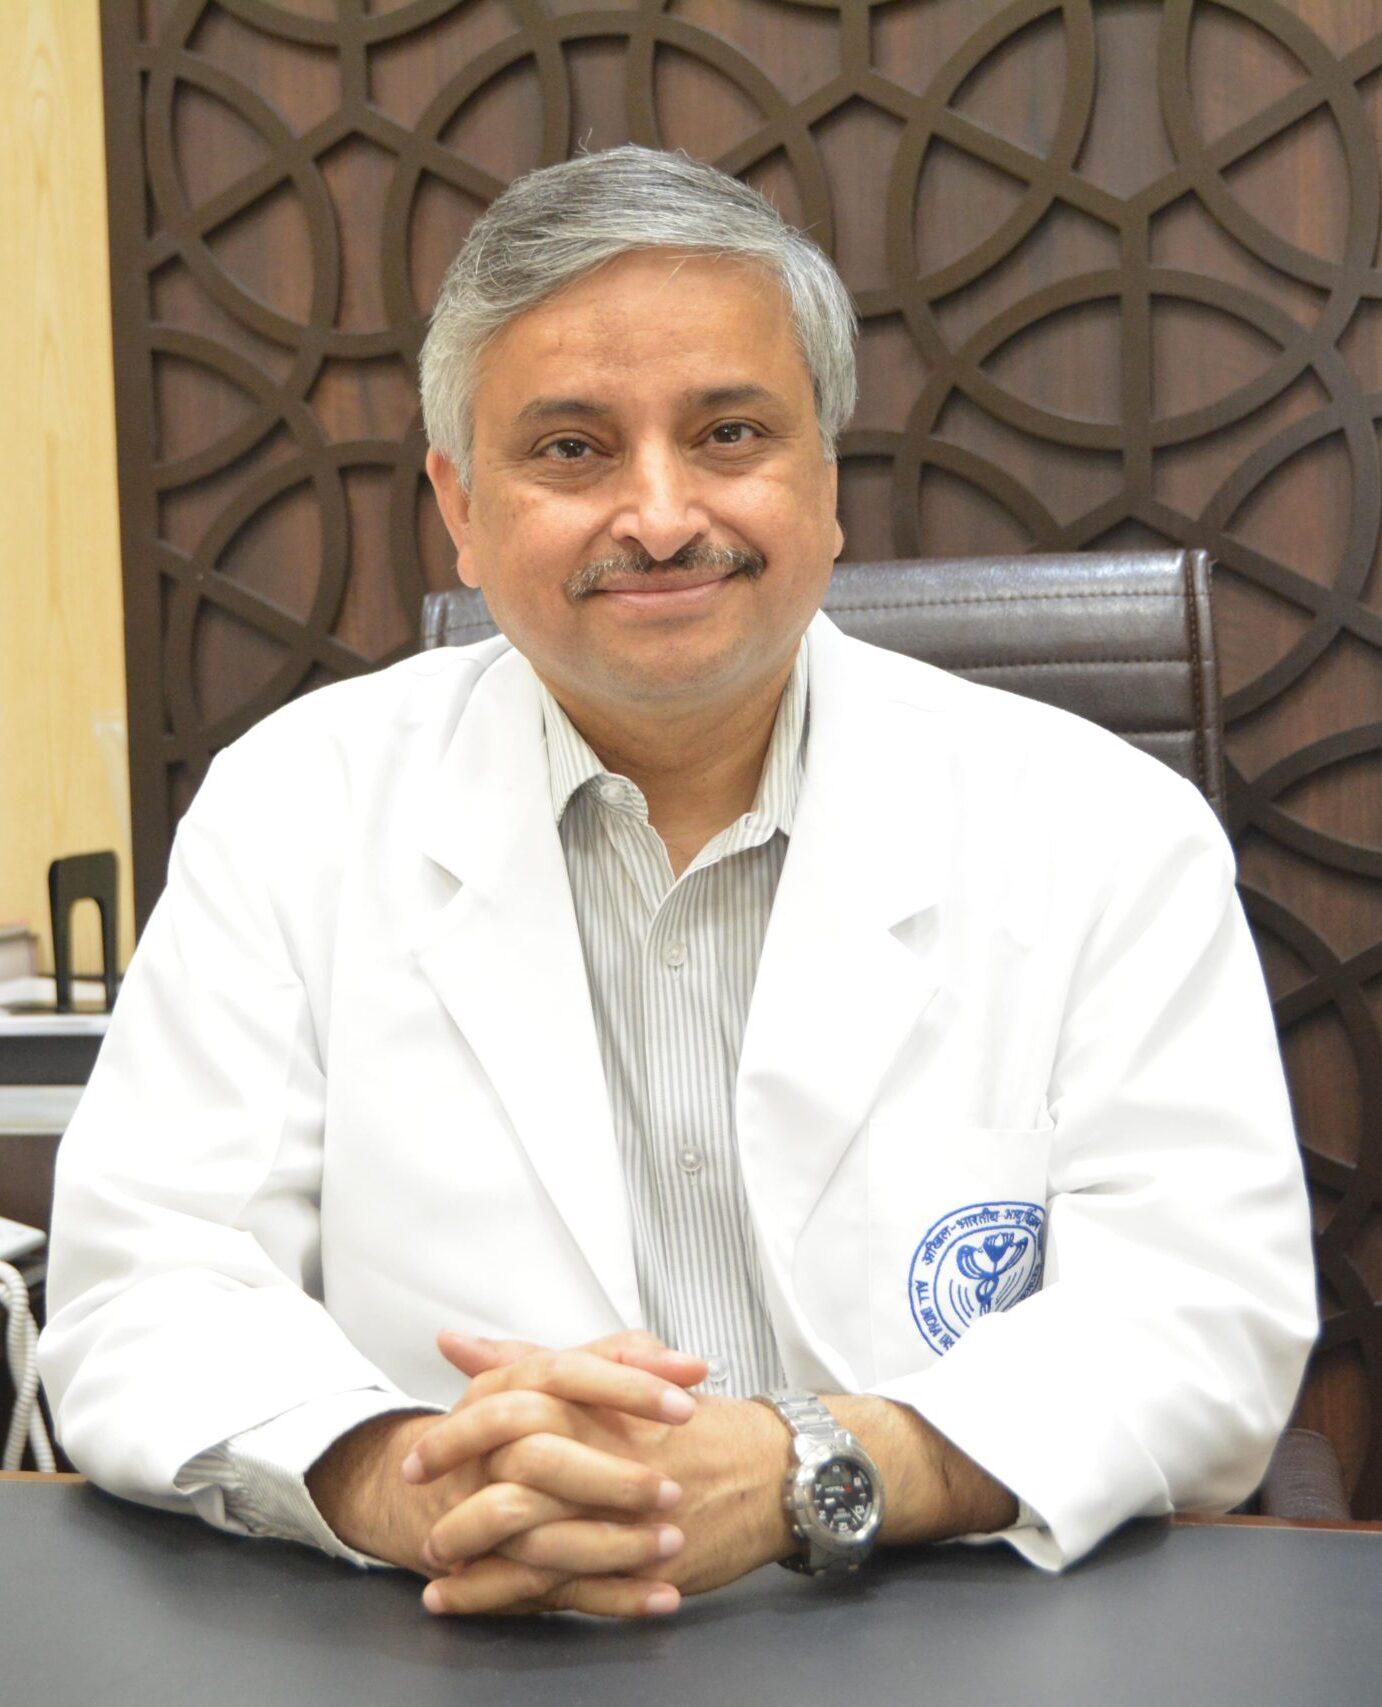 Dr Randeep Guleria Wiki, Age, Salary, Wife, Family, Qualification, Net Worth, Biography & More